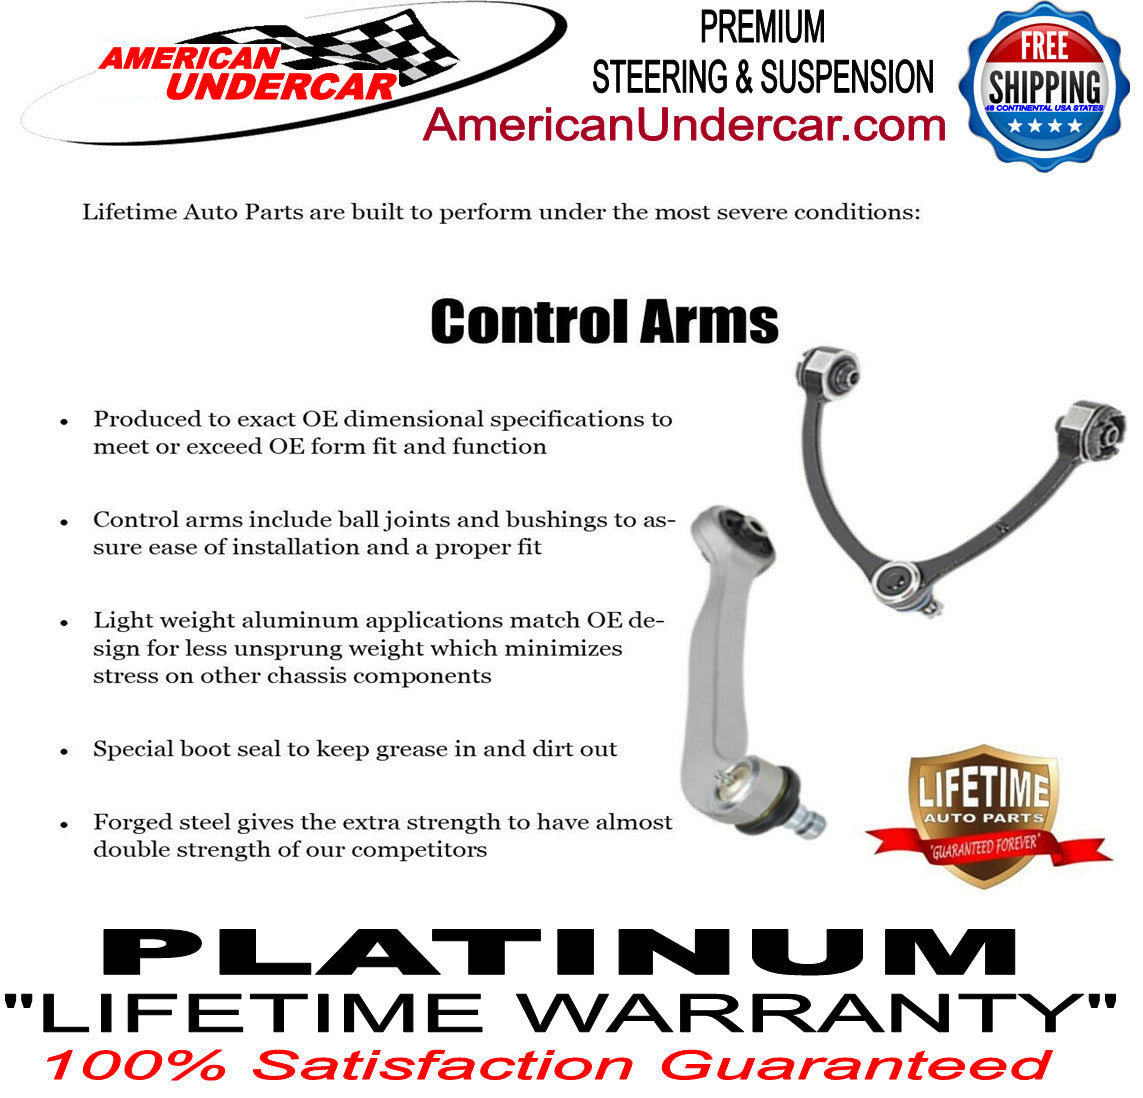 Lifetime Tie Rod Drag Link Steering Kit for 1995-1997 Ford F250, F250HD 4x4